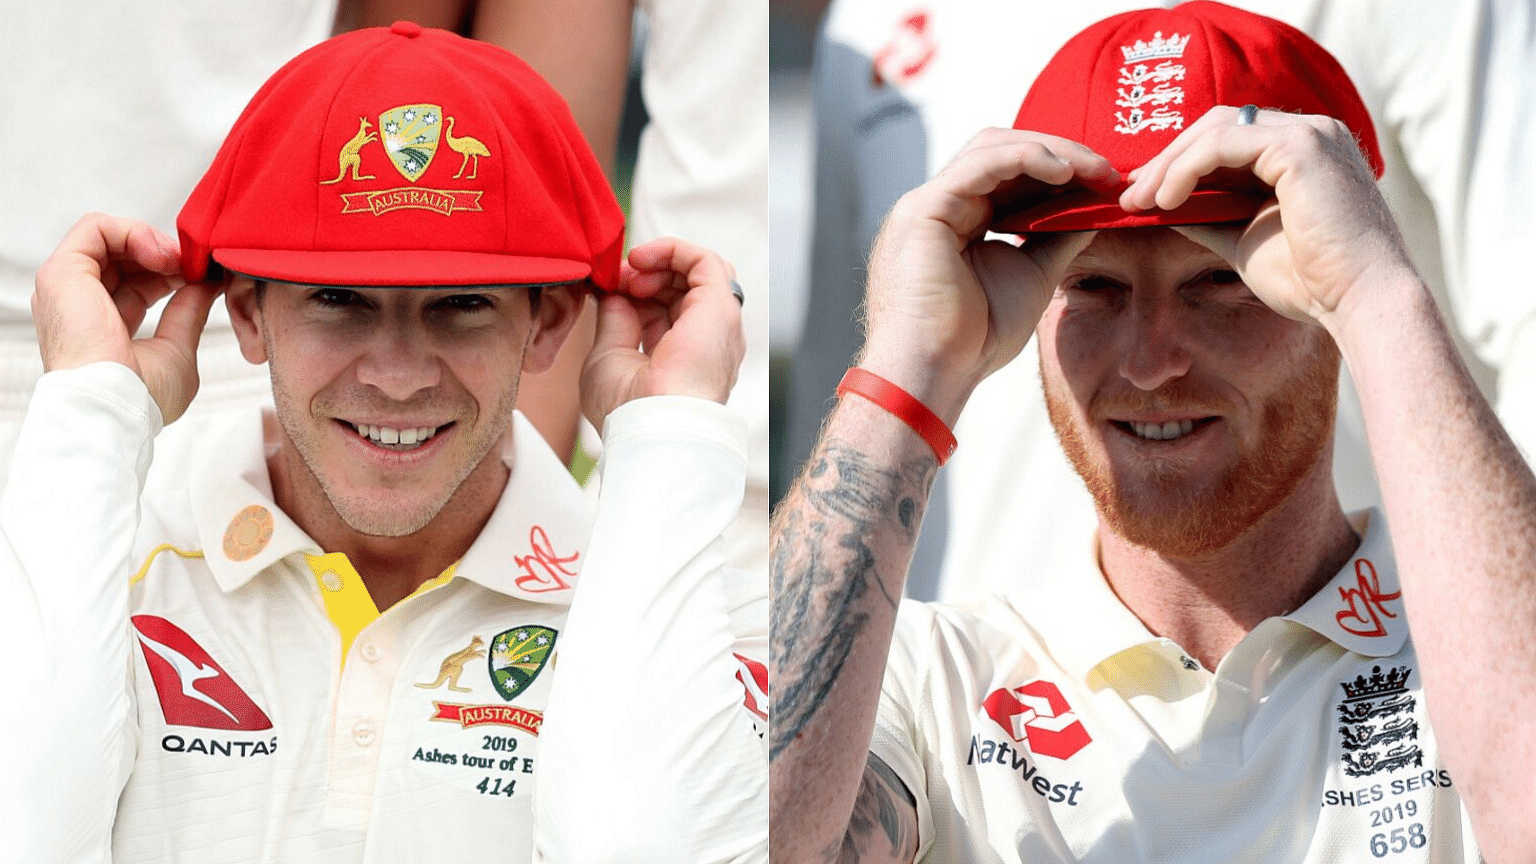 Australia captain Tim Paine and English cricketer Ben Stokes with their red caps ahead of the second Ashes Test.